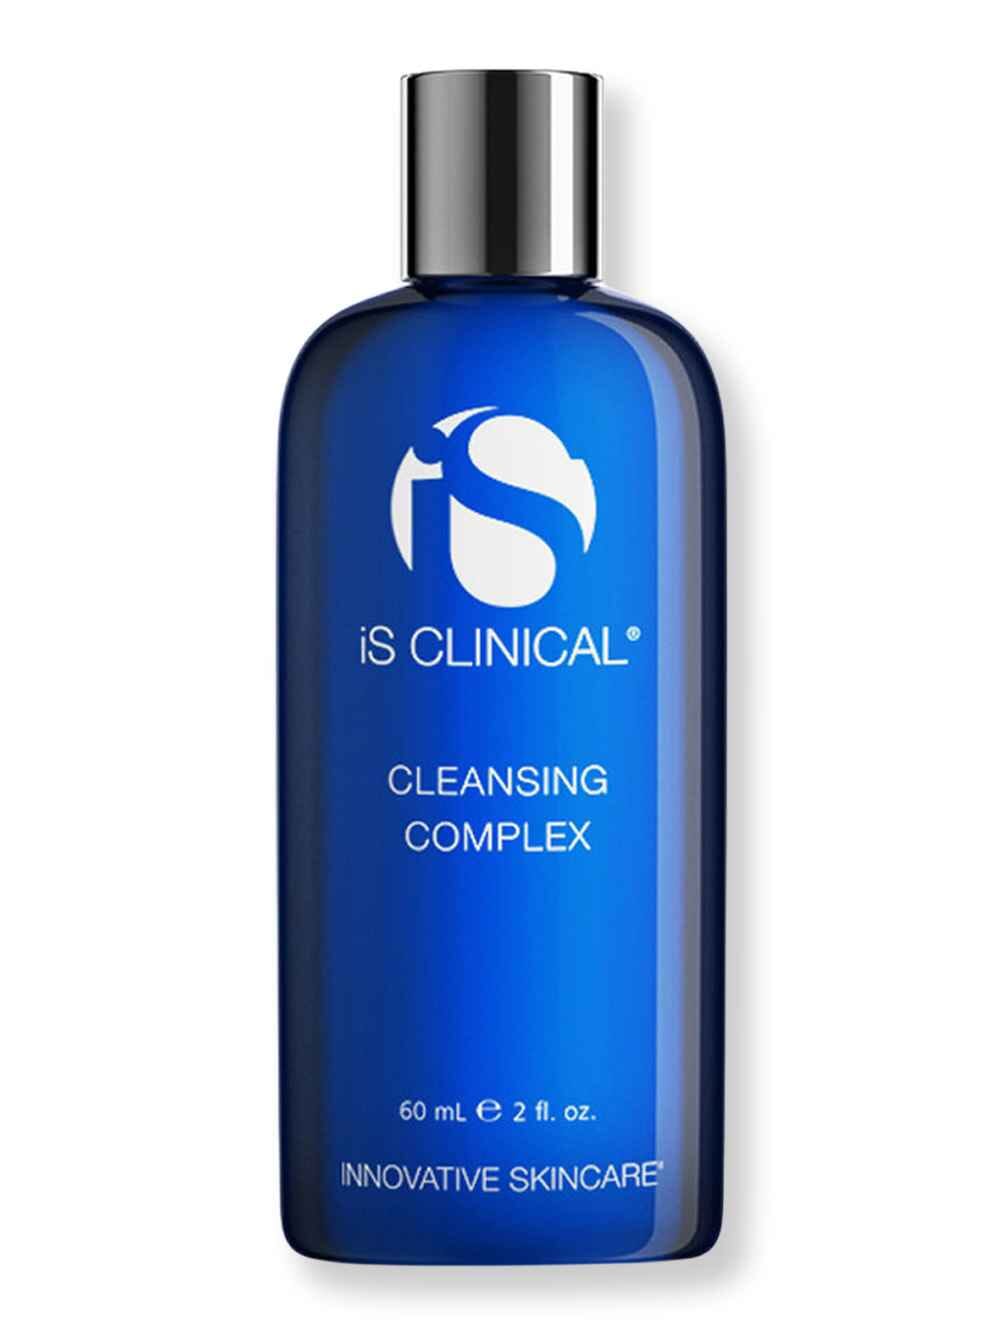 iS Clinical iS Clinical Cleansing Complex 2 fl oz60 ml Face Cleansers 